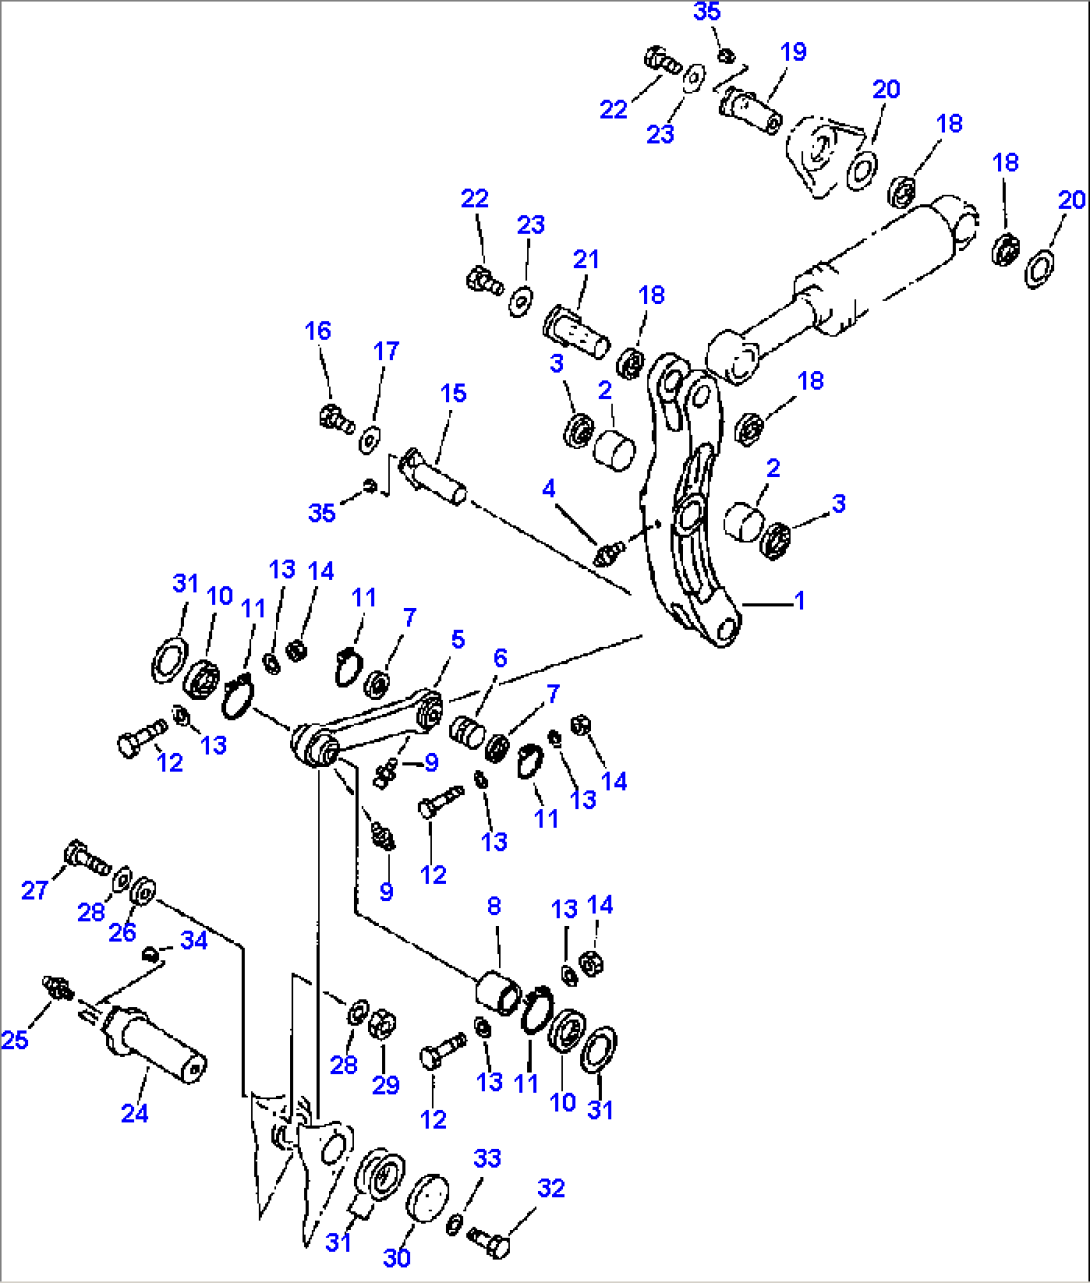 BELLCRANK ASSEMBLY FOR LOAD AND CARRY APPLICATION